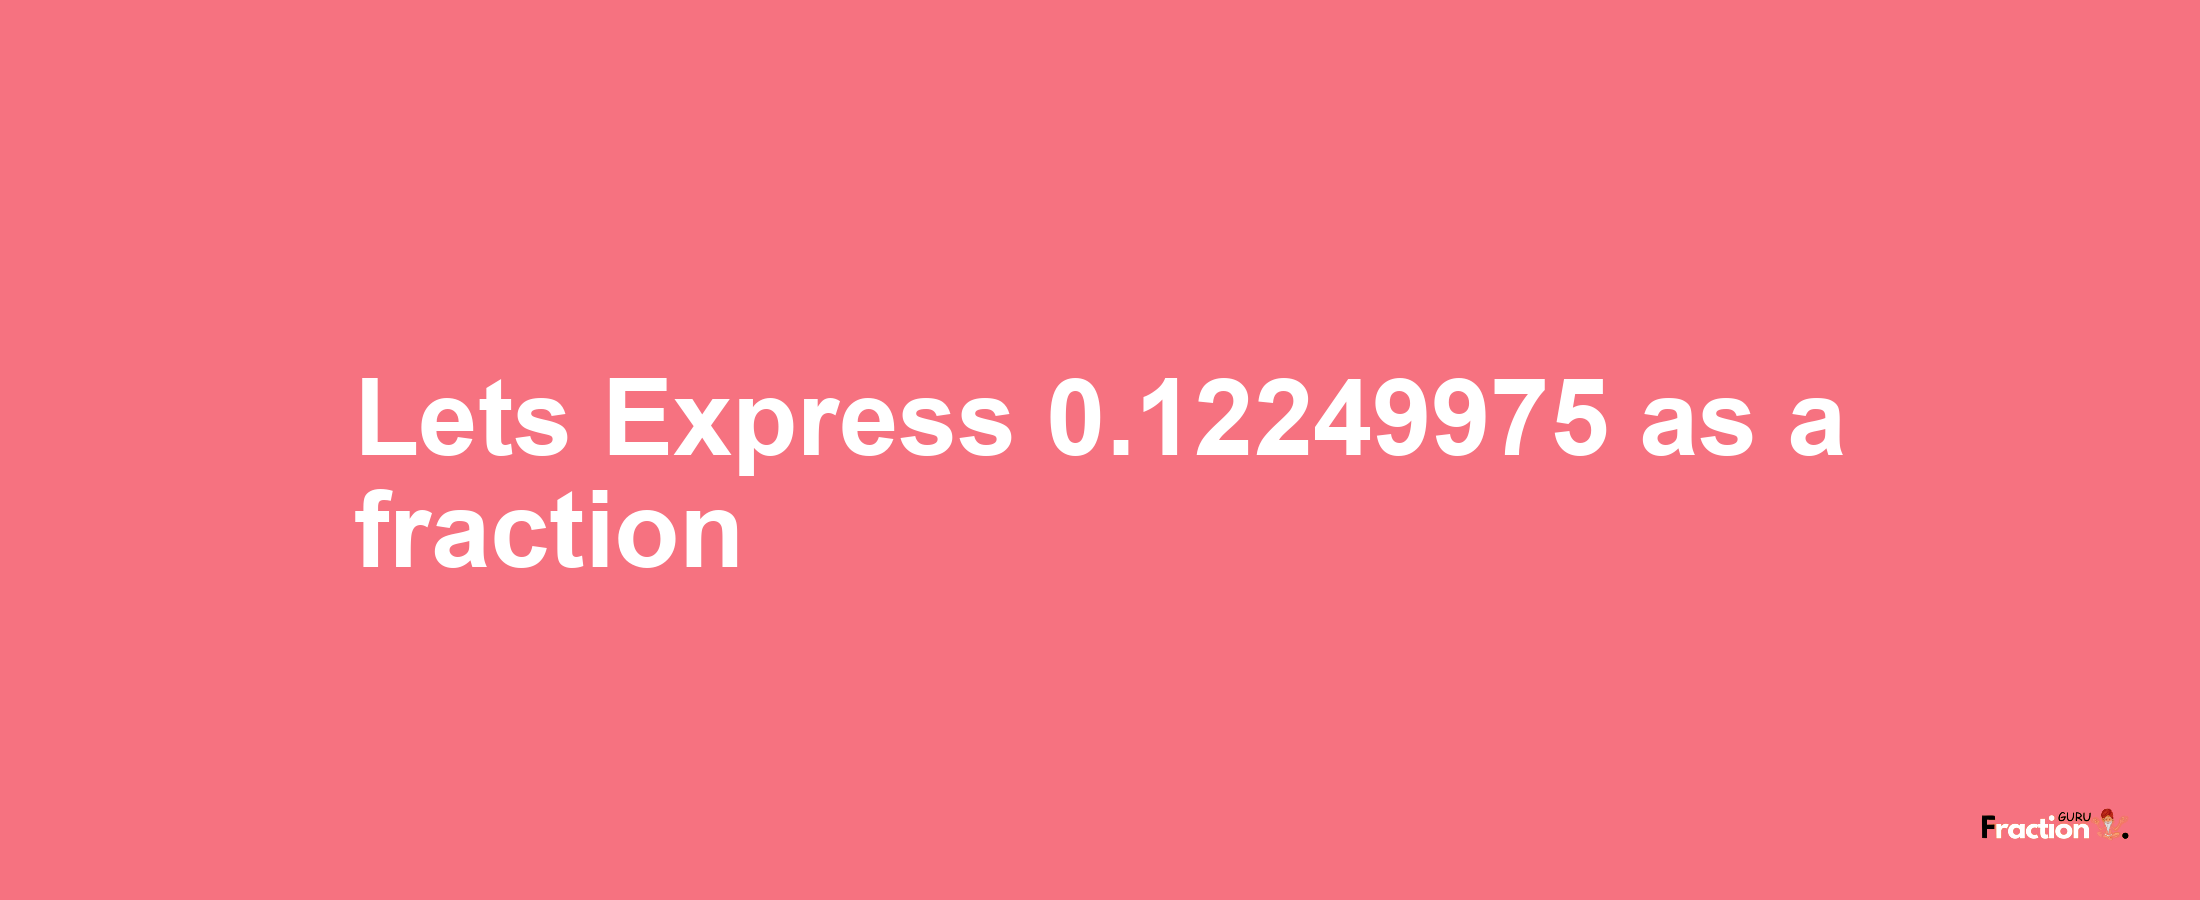 Lets Express 0.12249975 as afraction